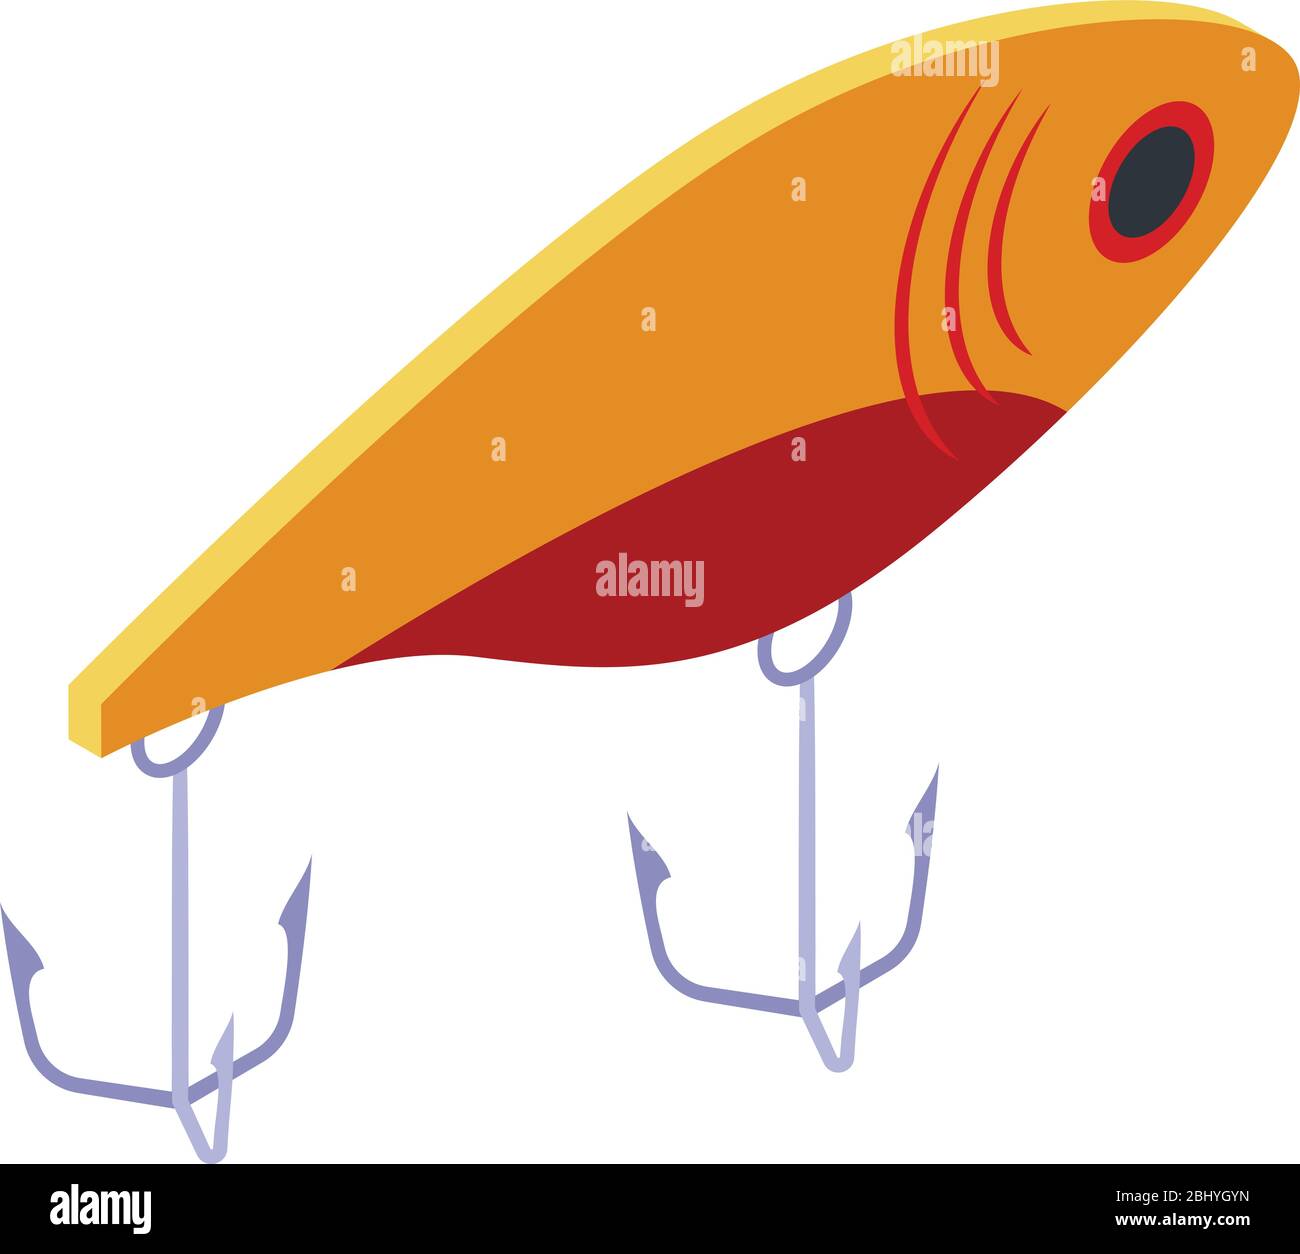 Soft plastic fishing lure Stock Vector Images - Alamy